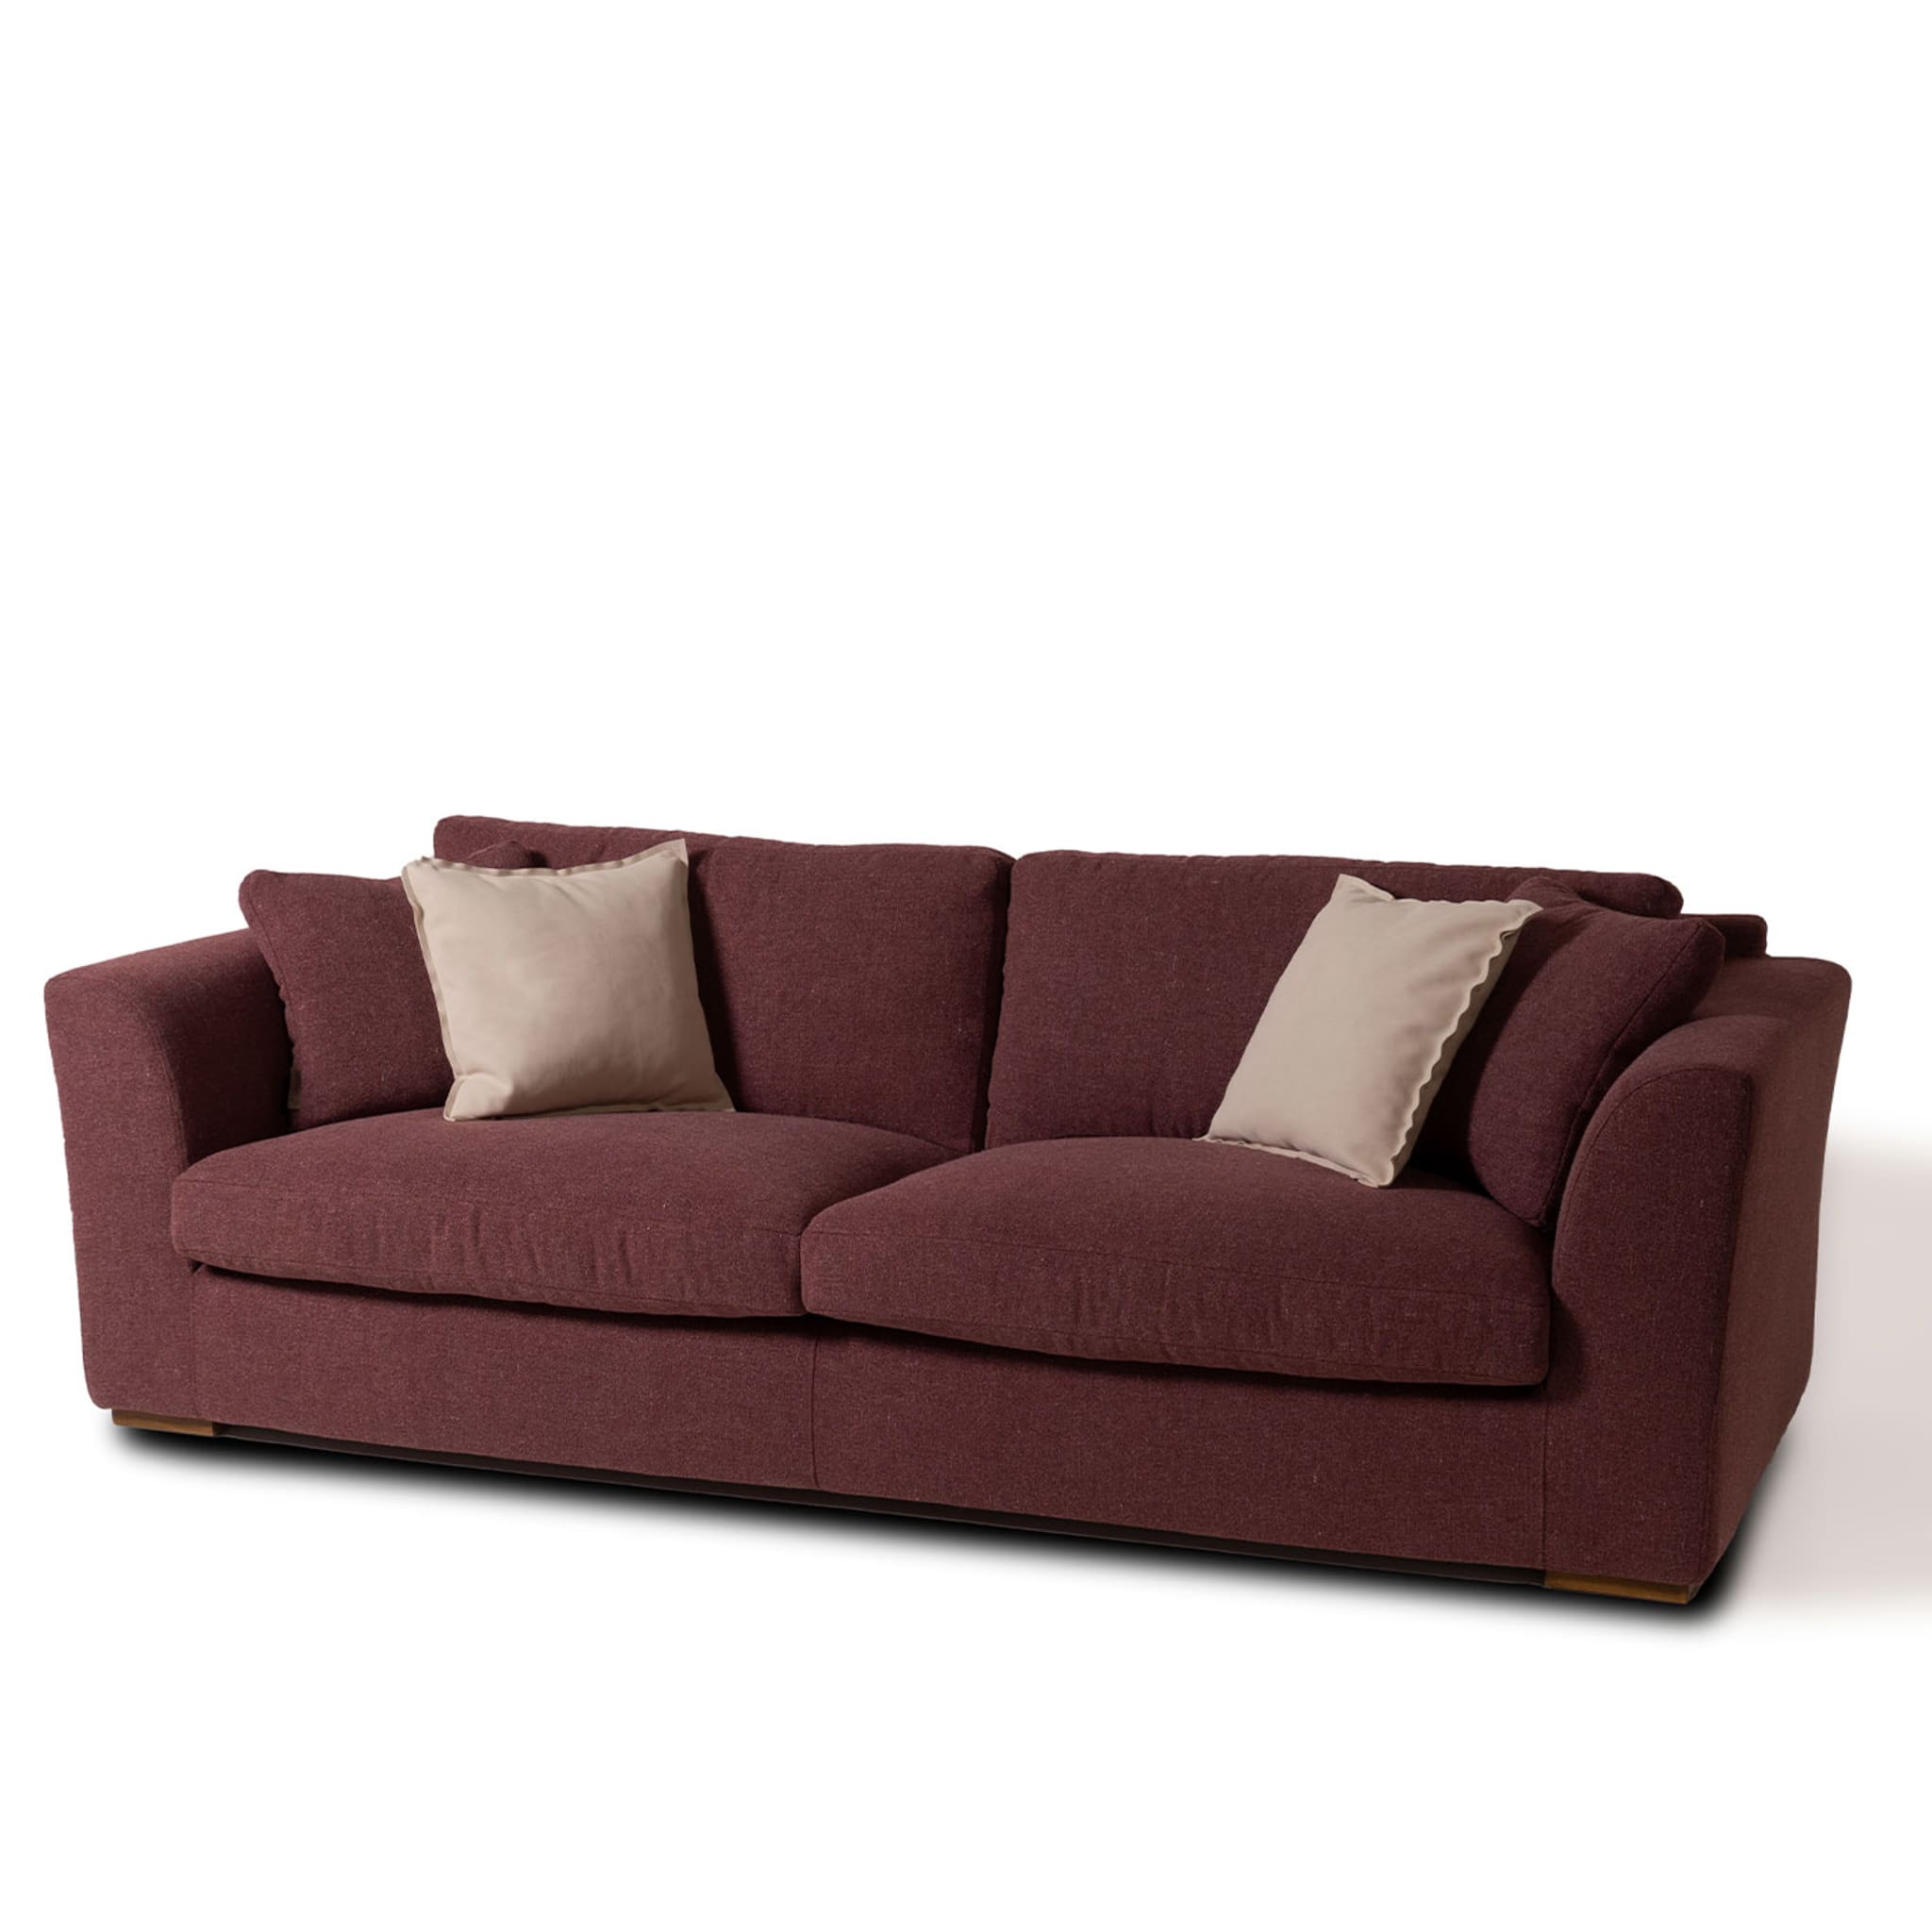 Sandy Sofa 3 Seater by Marco and Giulio Mantellassi - Alternative view 1